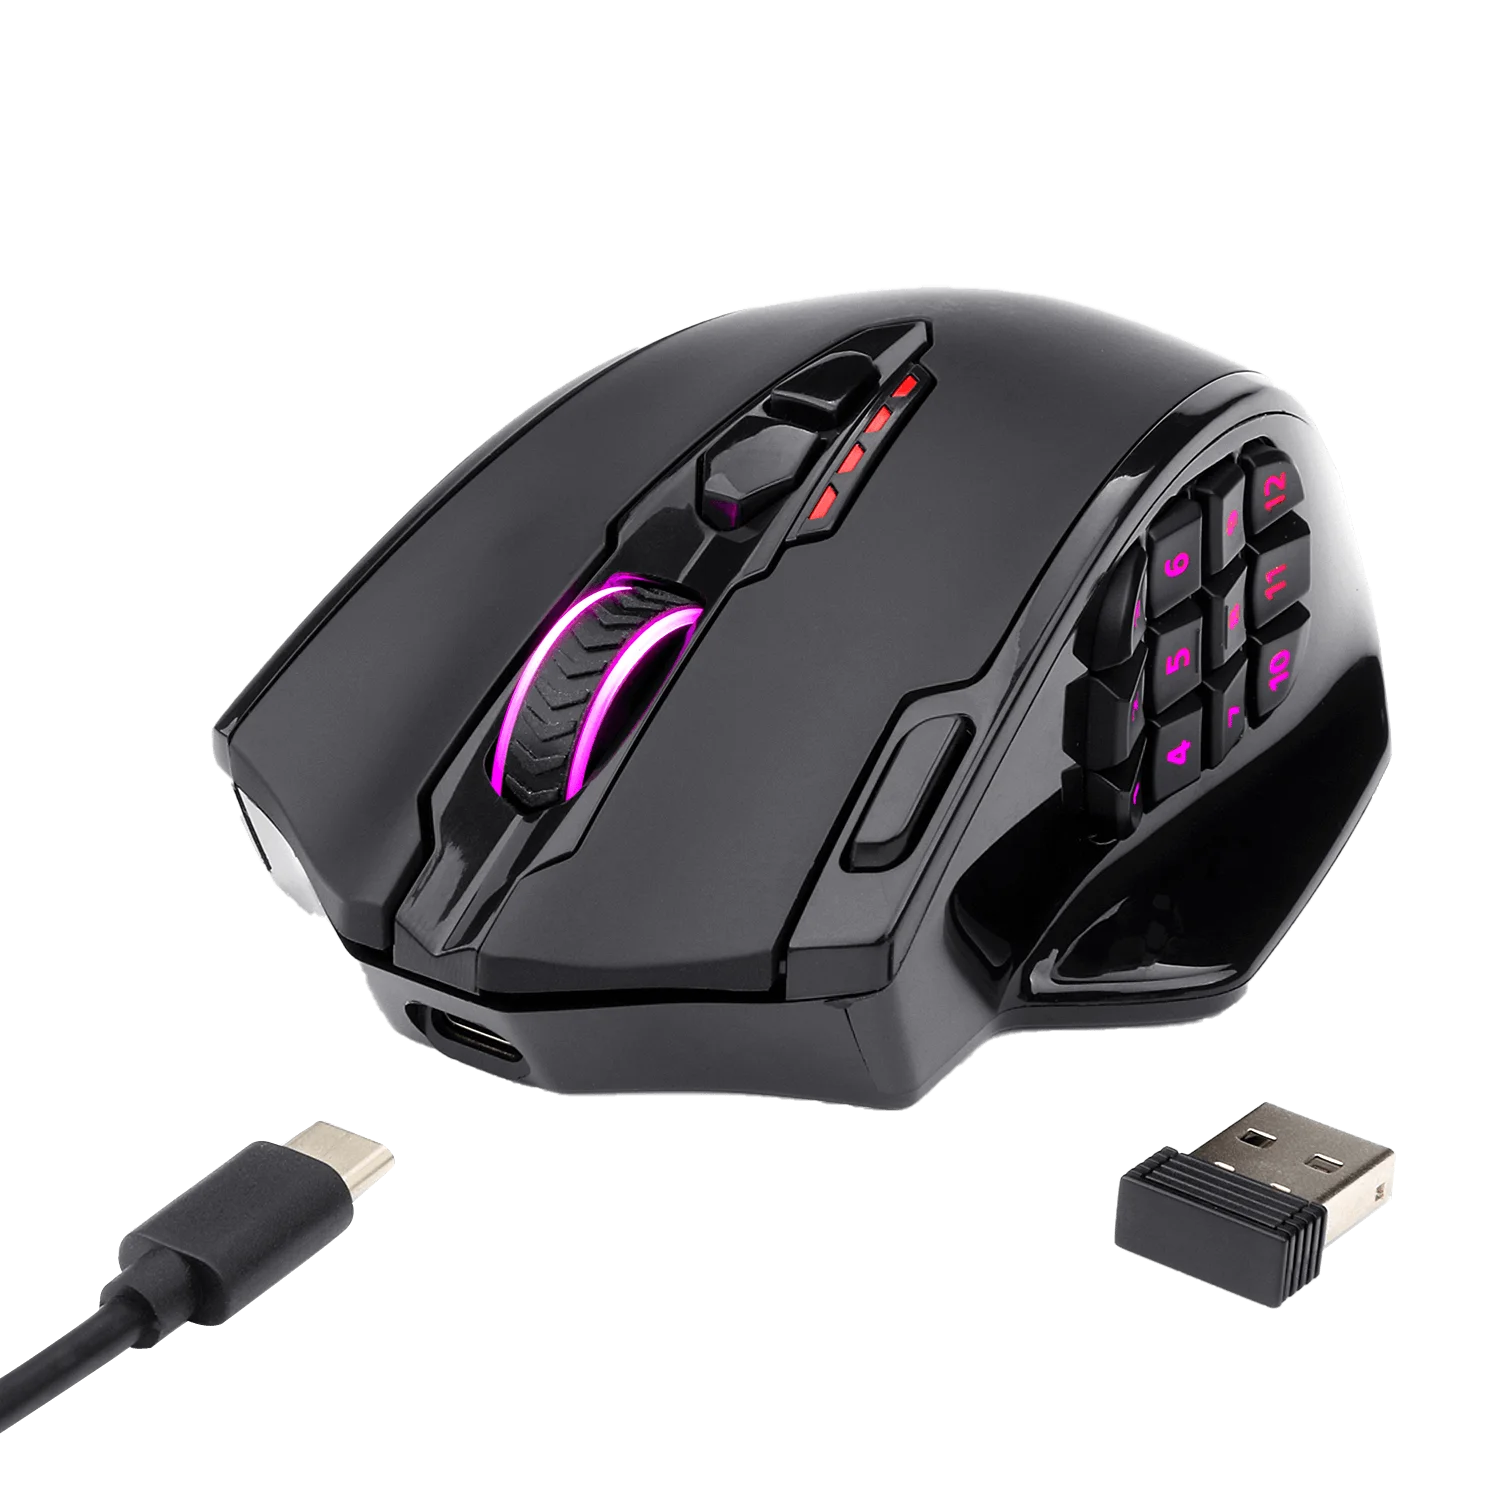 M913 Impact Elite Wireless Gaming Mouse with 16 Programmable Buttons, 16000 DPI, 80 Hr Battery and Pro Optical Sensor